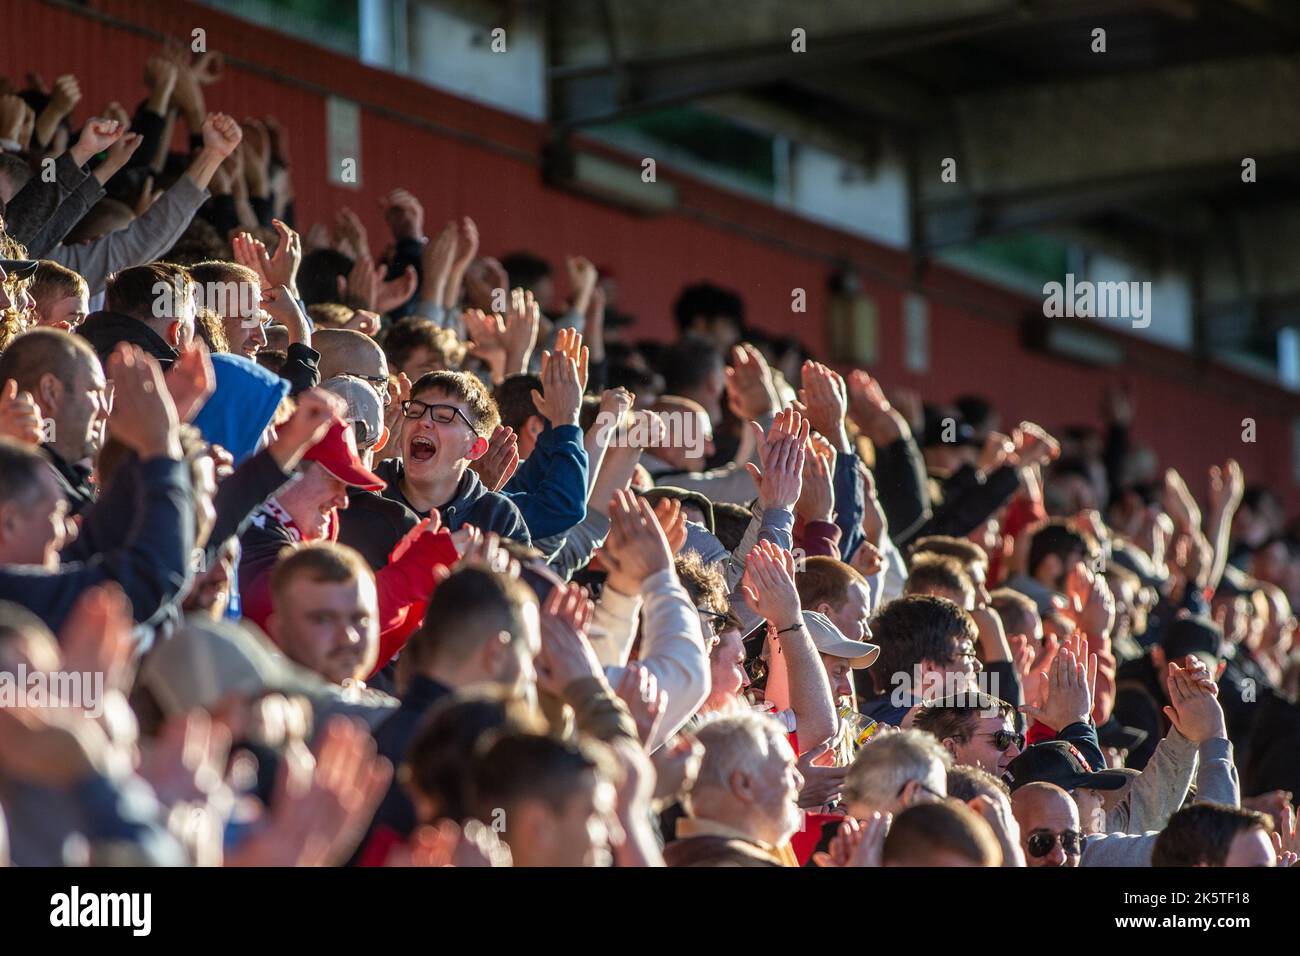 Football / soccer fans and spectators on standing terrace at stadium applauding and clapping during game. Stock Photo